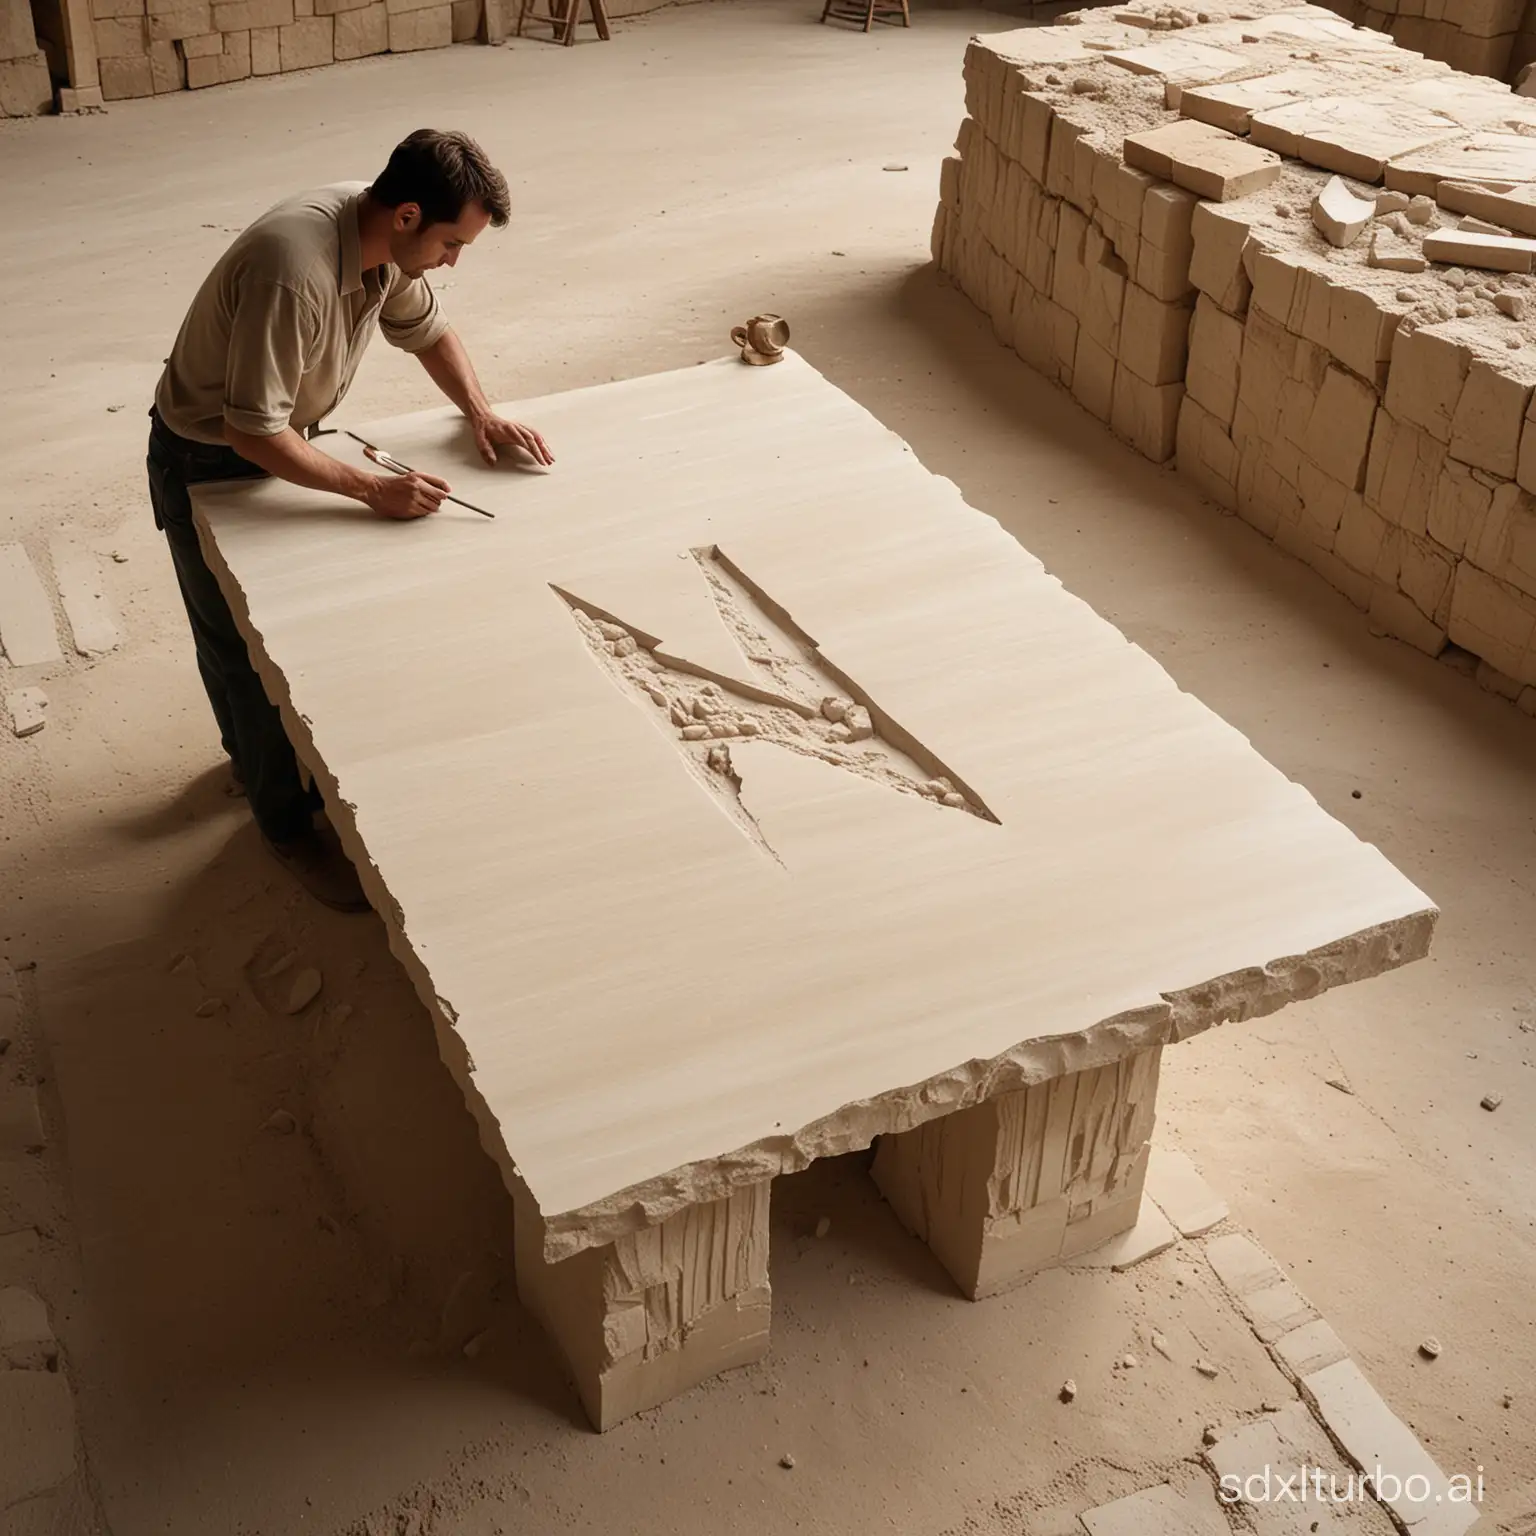 "A cinematic and realistic depiction of a travertine stone quarry, captured as if by an art photographer. The scene highlights the rich beige tones of the quarry while showcasing a craftsman at work. In one corner of the image, the craftsman meticulously hand-carves a piece of travertine stone into a sophisticated table. Uniquely, the craftsman is also engraving the letter 'N' into the surface of the table. This visual narrative contrasts the ruggedness of the quarry environment with the delicate craftsmanship involved in turning raw stone into a polished, functional piece of furniture."